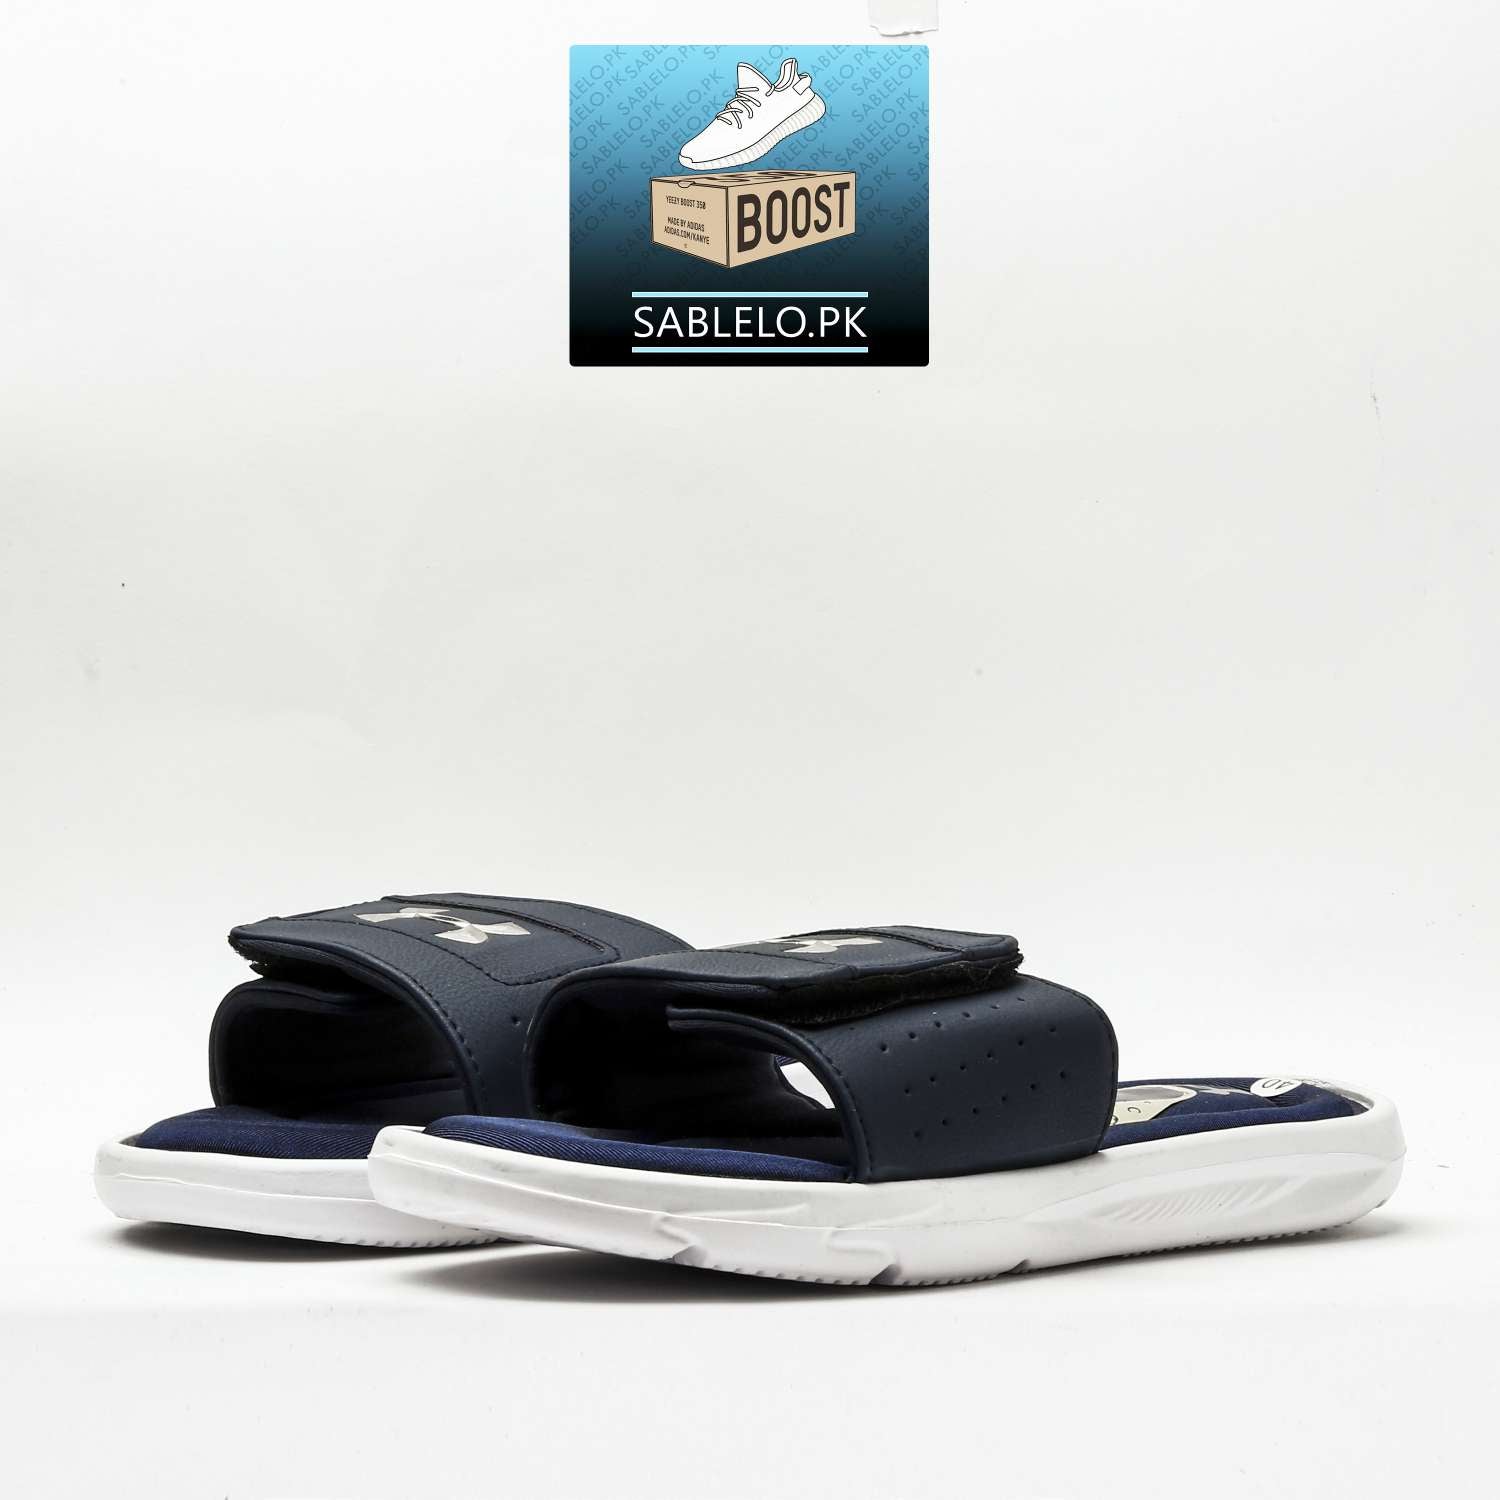 Under Armor slippers Blue - Premium Shoes from perfectshop - Just Rs.2499! Shop now at Sablelo.pk